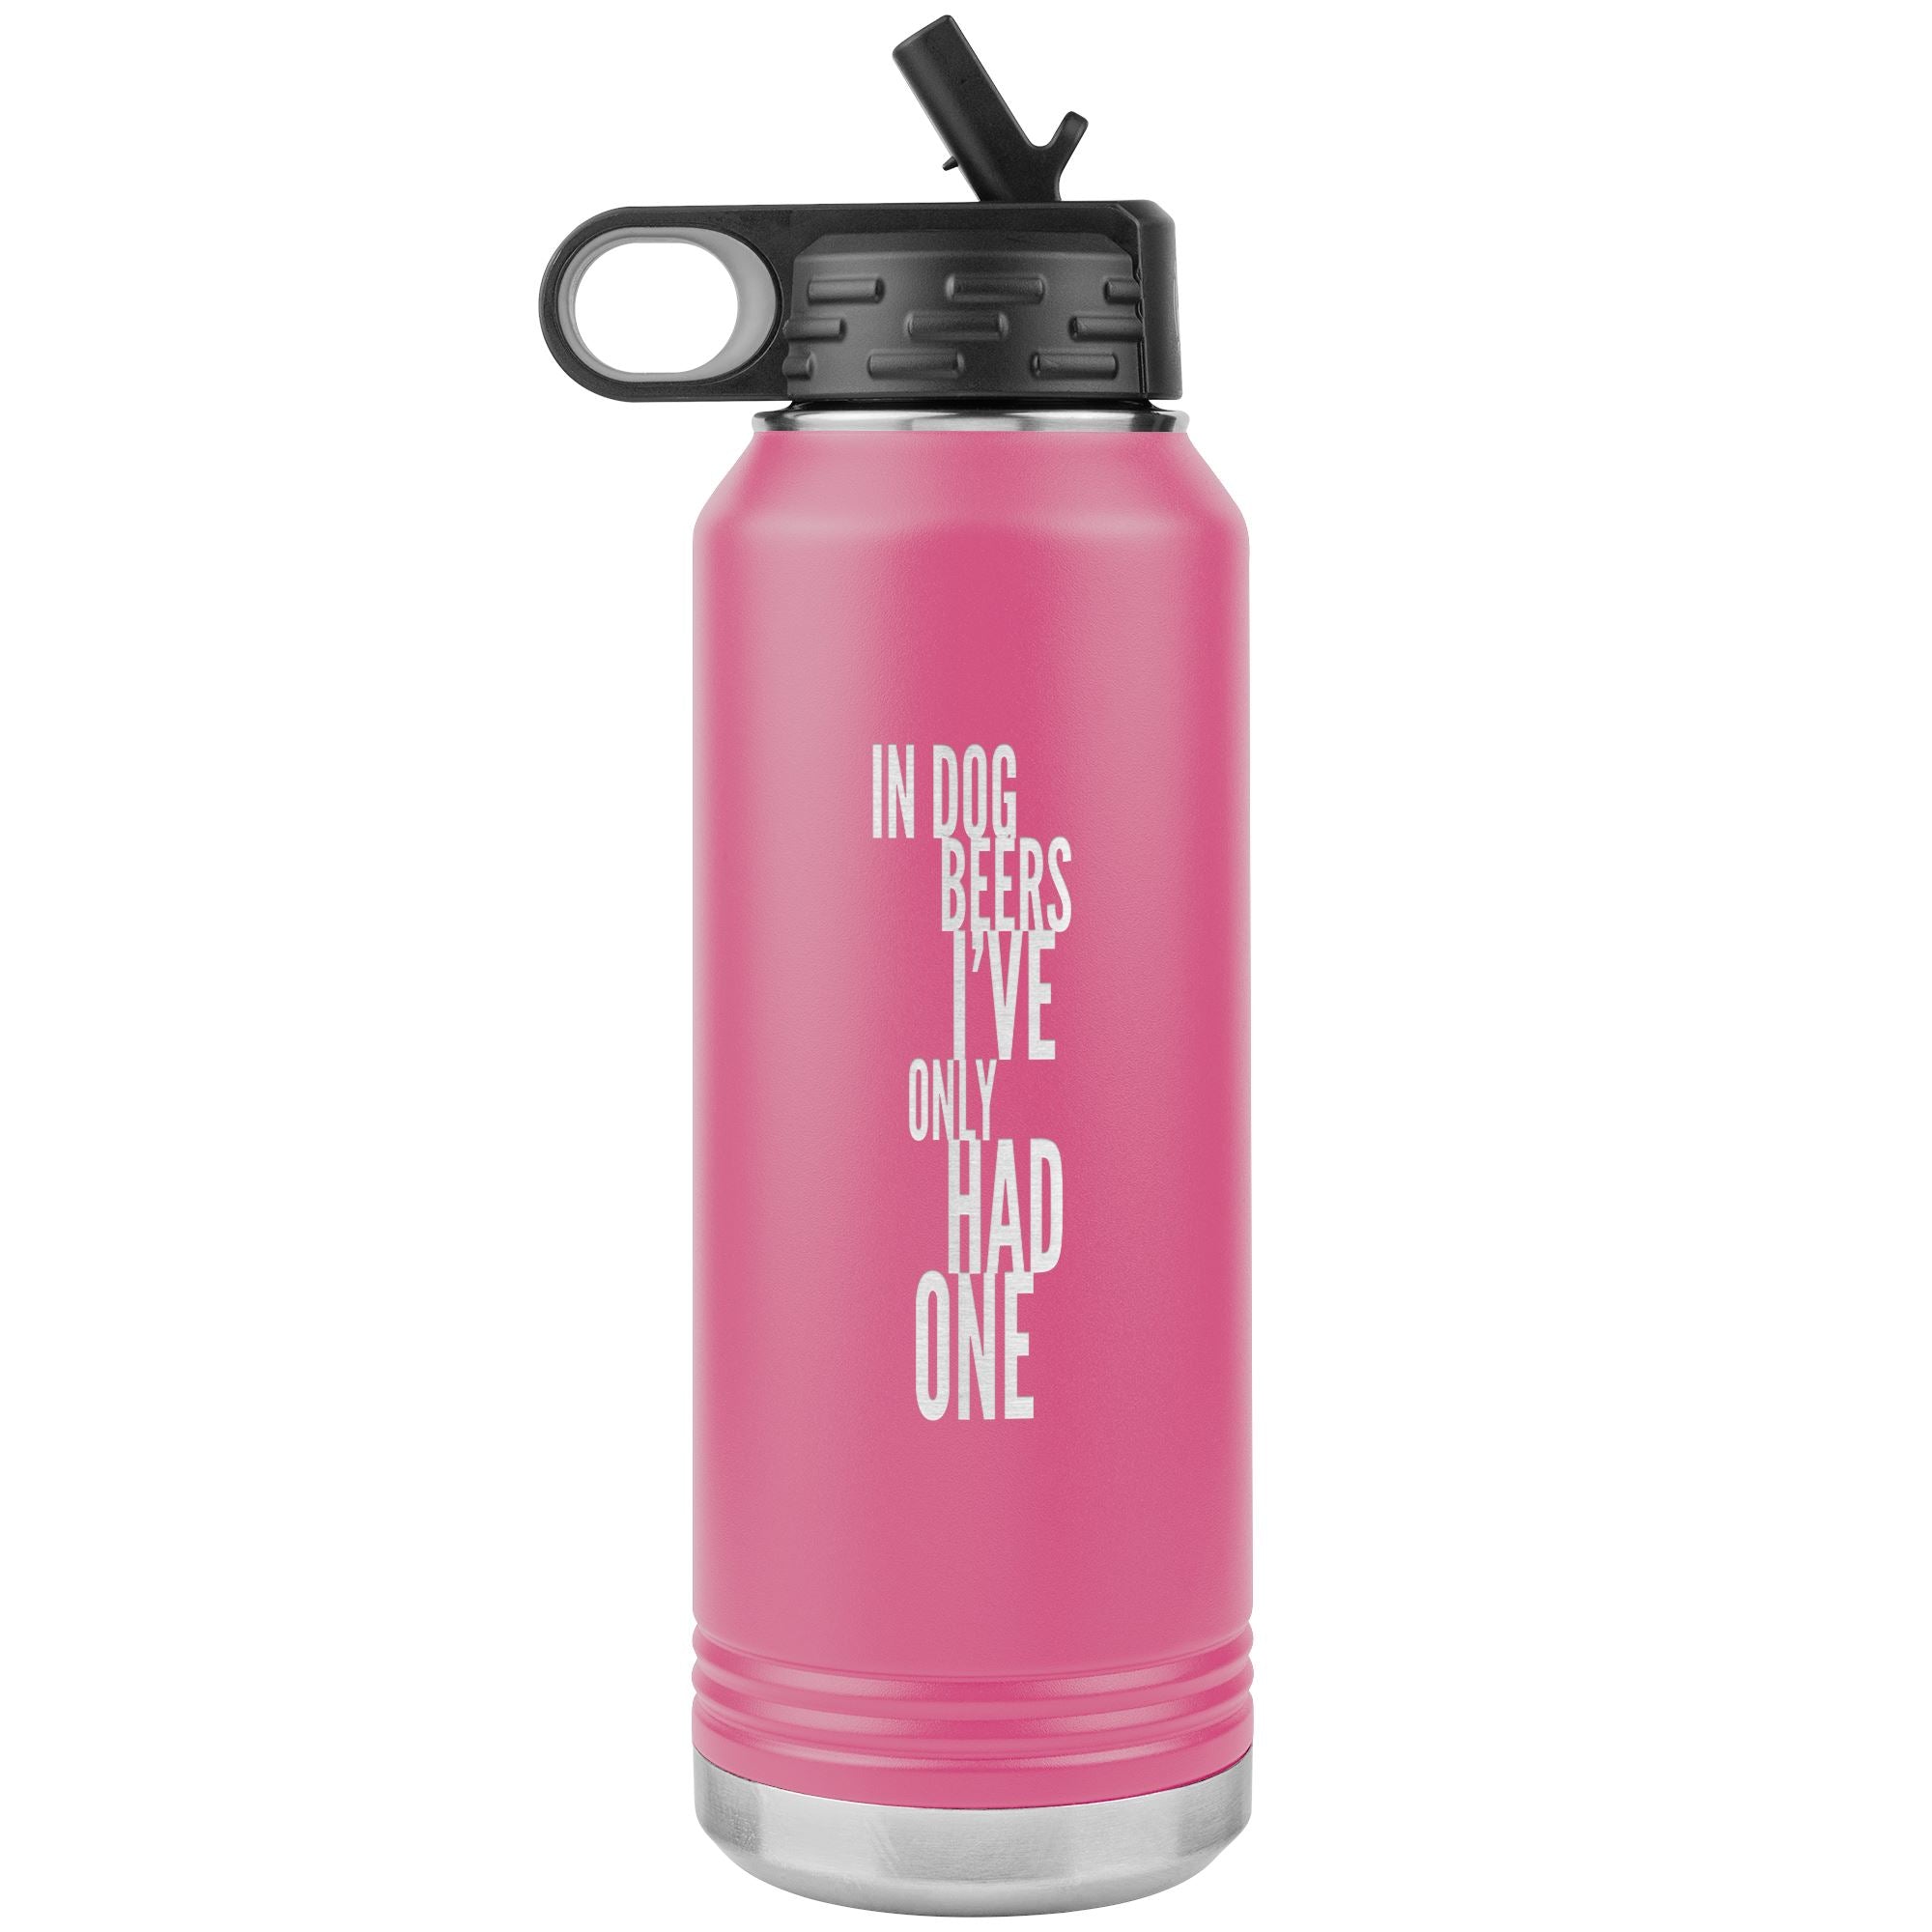 In Dog Beers I've Only Had One 32oz Tumbler Tumblers Pink 